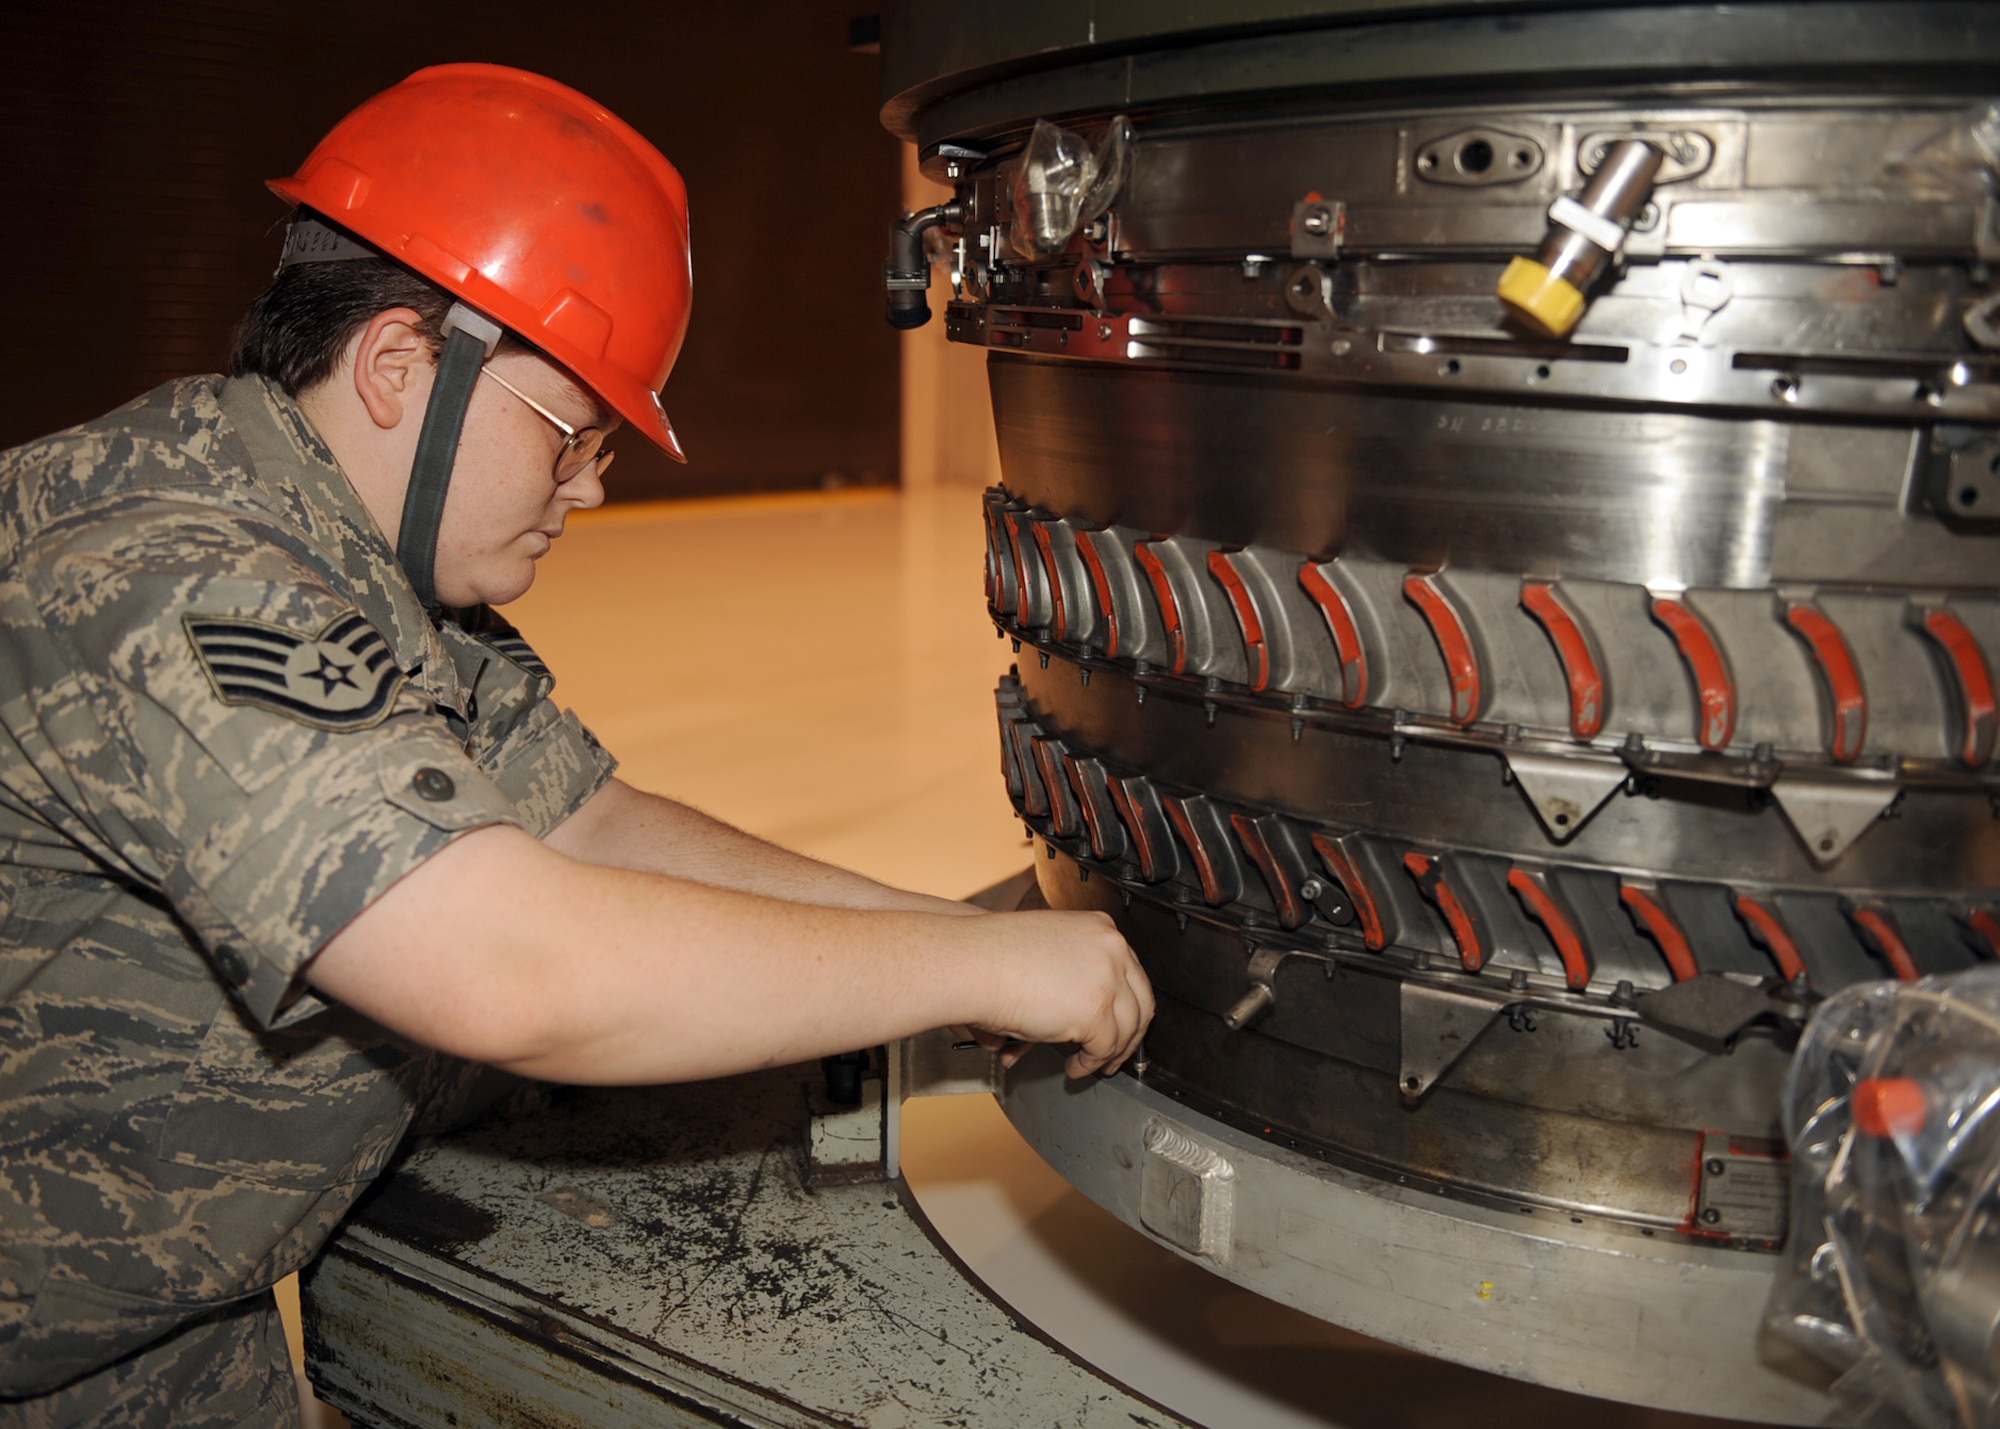 Staff Sgt. Rachel Hayes, 4th Component Maintenance Squadron module technician, prepares a fan for shipment to an overhaul repair facility on Seymour Johnson Air Force Base, N.C., Sept. 14, 2009. All unserviceable engine parts are shipped to a repair facility located at Tinker Air Force Base, Okla. Seymour Johnson is responsible for the parts of 95 F-15Es here and Langley Air Force Base, Va.'s, 22 F-15C aircraft. (U.S. Air Force photo by Senior Airman Ciara Wymbs)